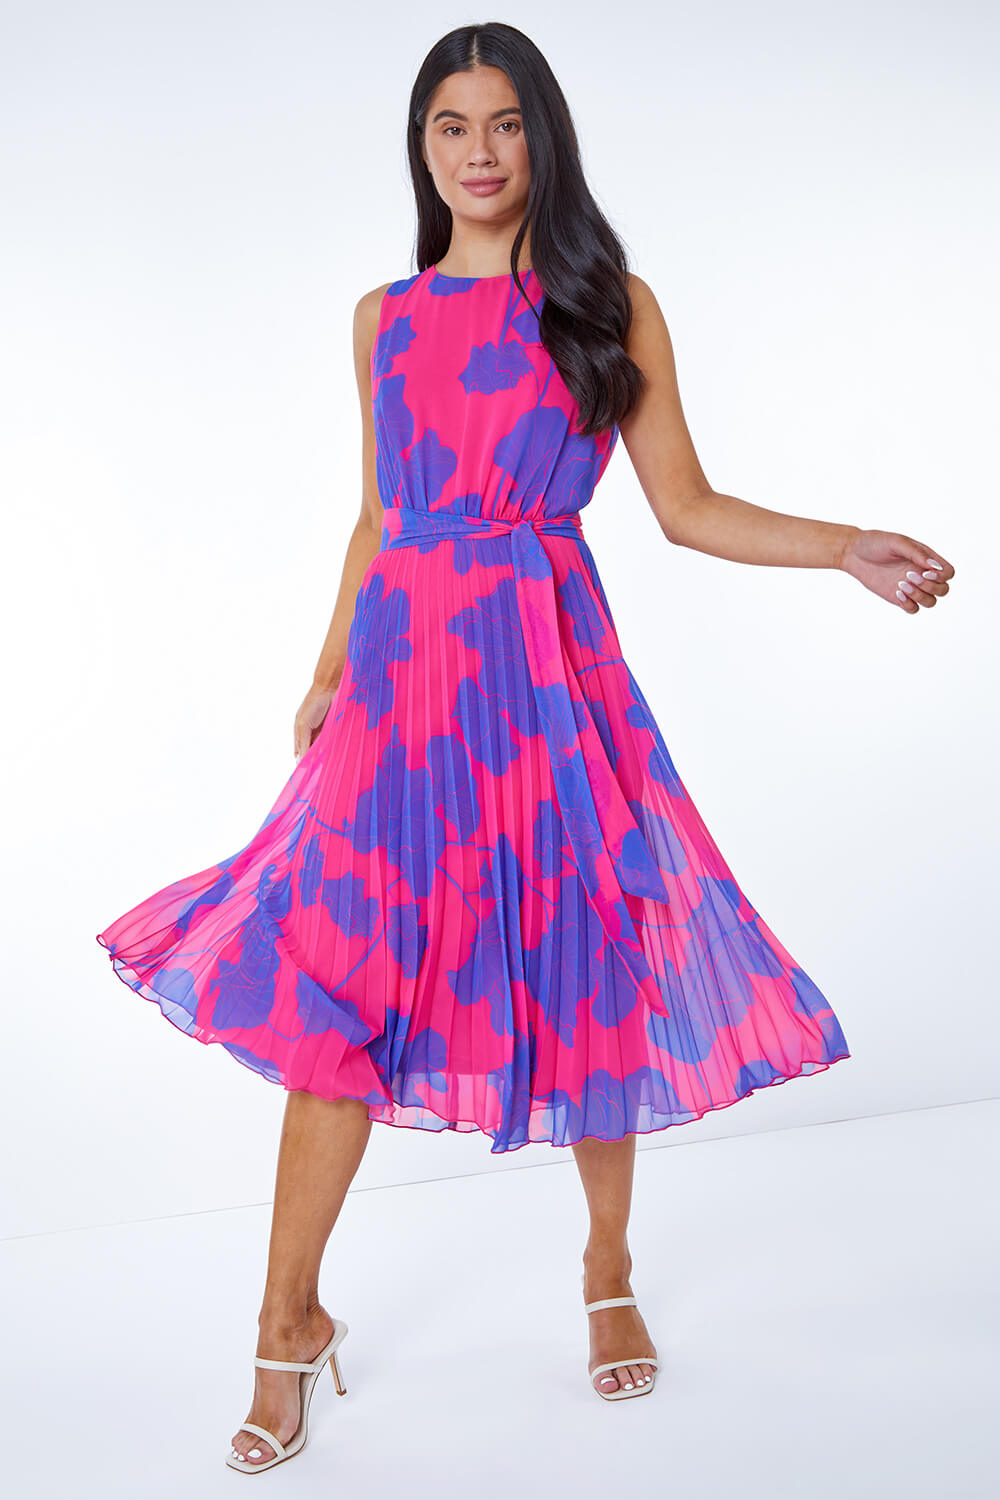 PINK Petite Floral Linear Pleated Chiffon Dress, Image 2 of 5